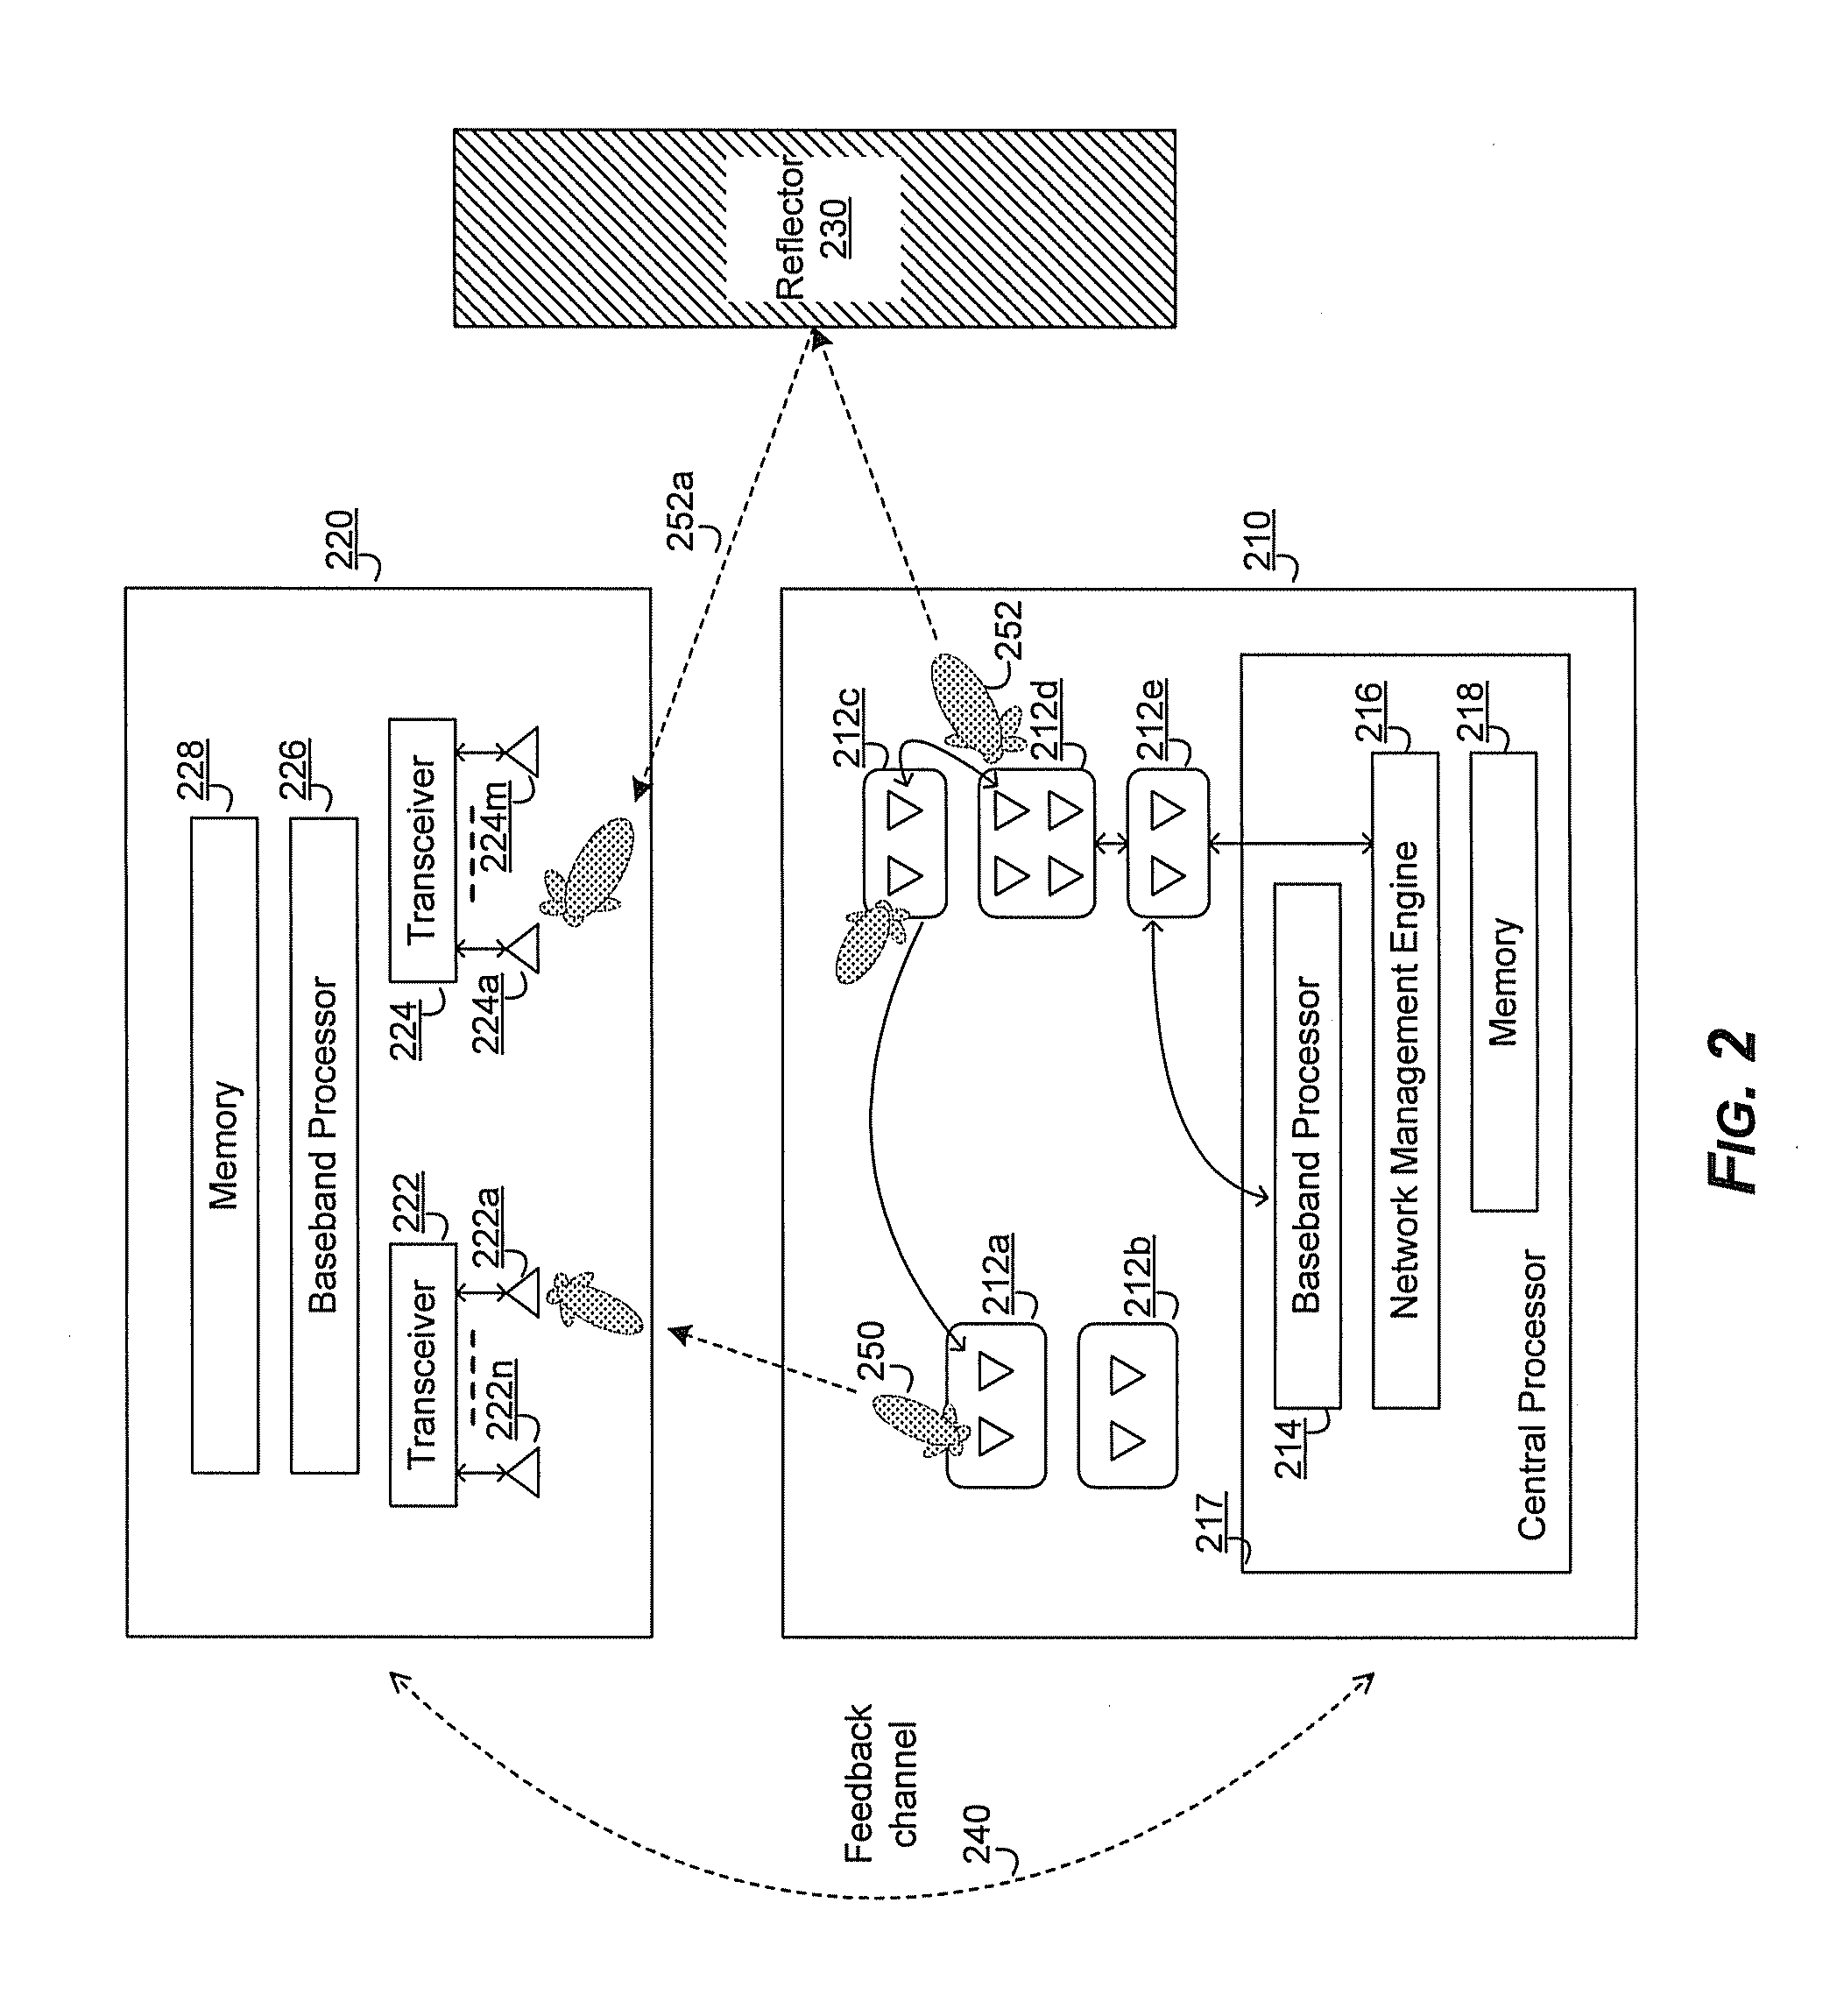 Method and system for providing diversity in a network that utilizes distributed transceivers and array processing